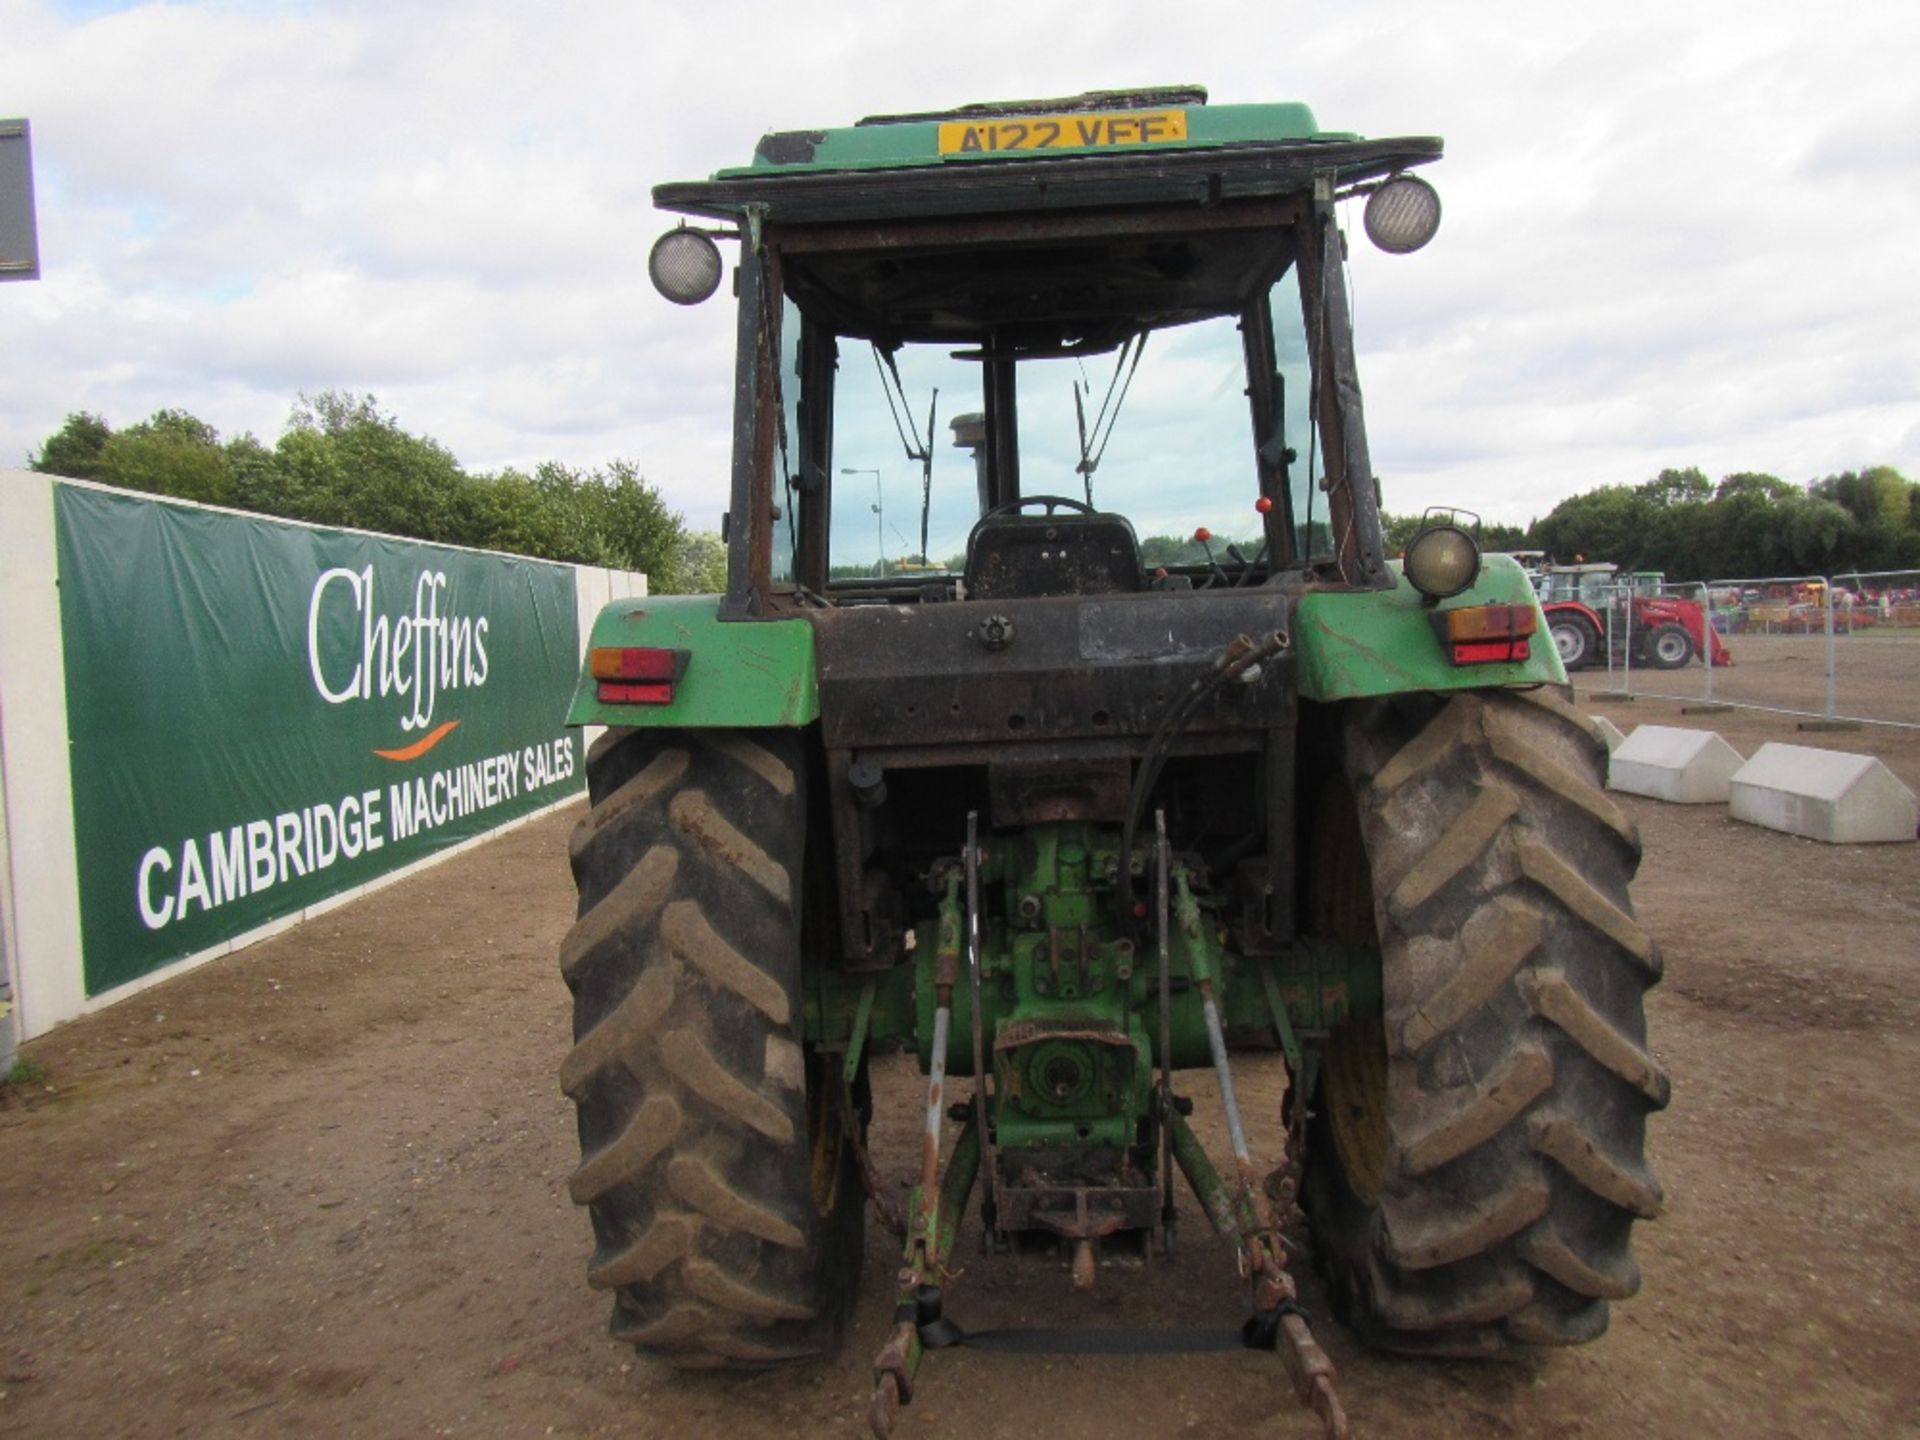 John Deere 3040 4x4 Tractor. Has Been Subject to TOTAL LOSS INSURANCE CLAIM. Reg. No. A122 VFE - Image 6 of 14